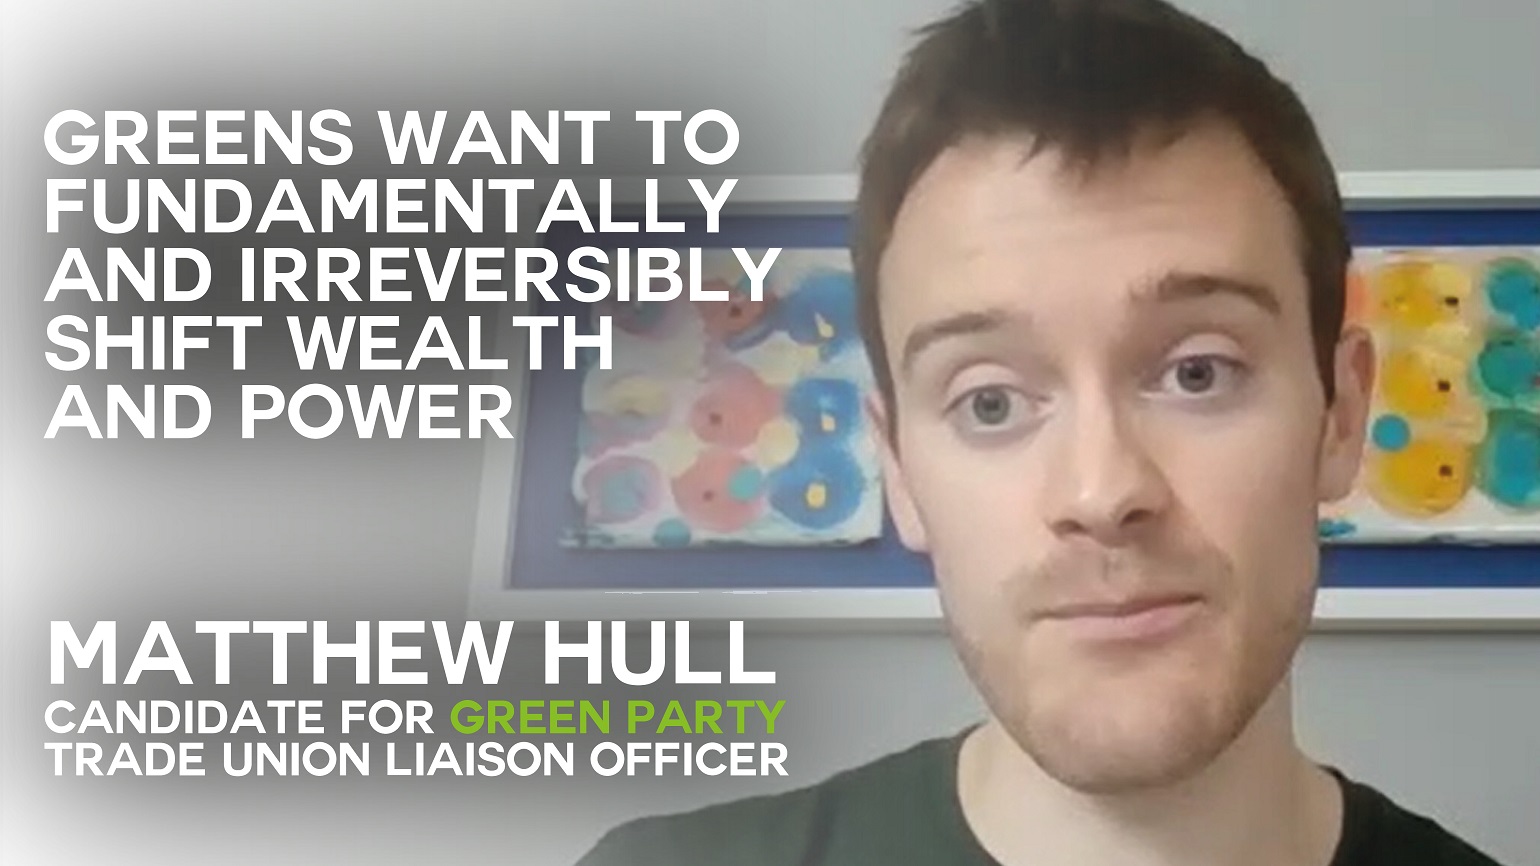 A still from an interview with Matthew Hull with text overlaid reading "Greens want to fundamentally and irreversibly shift wealth and power"